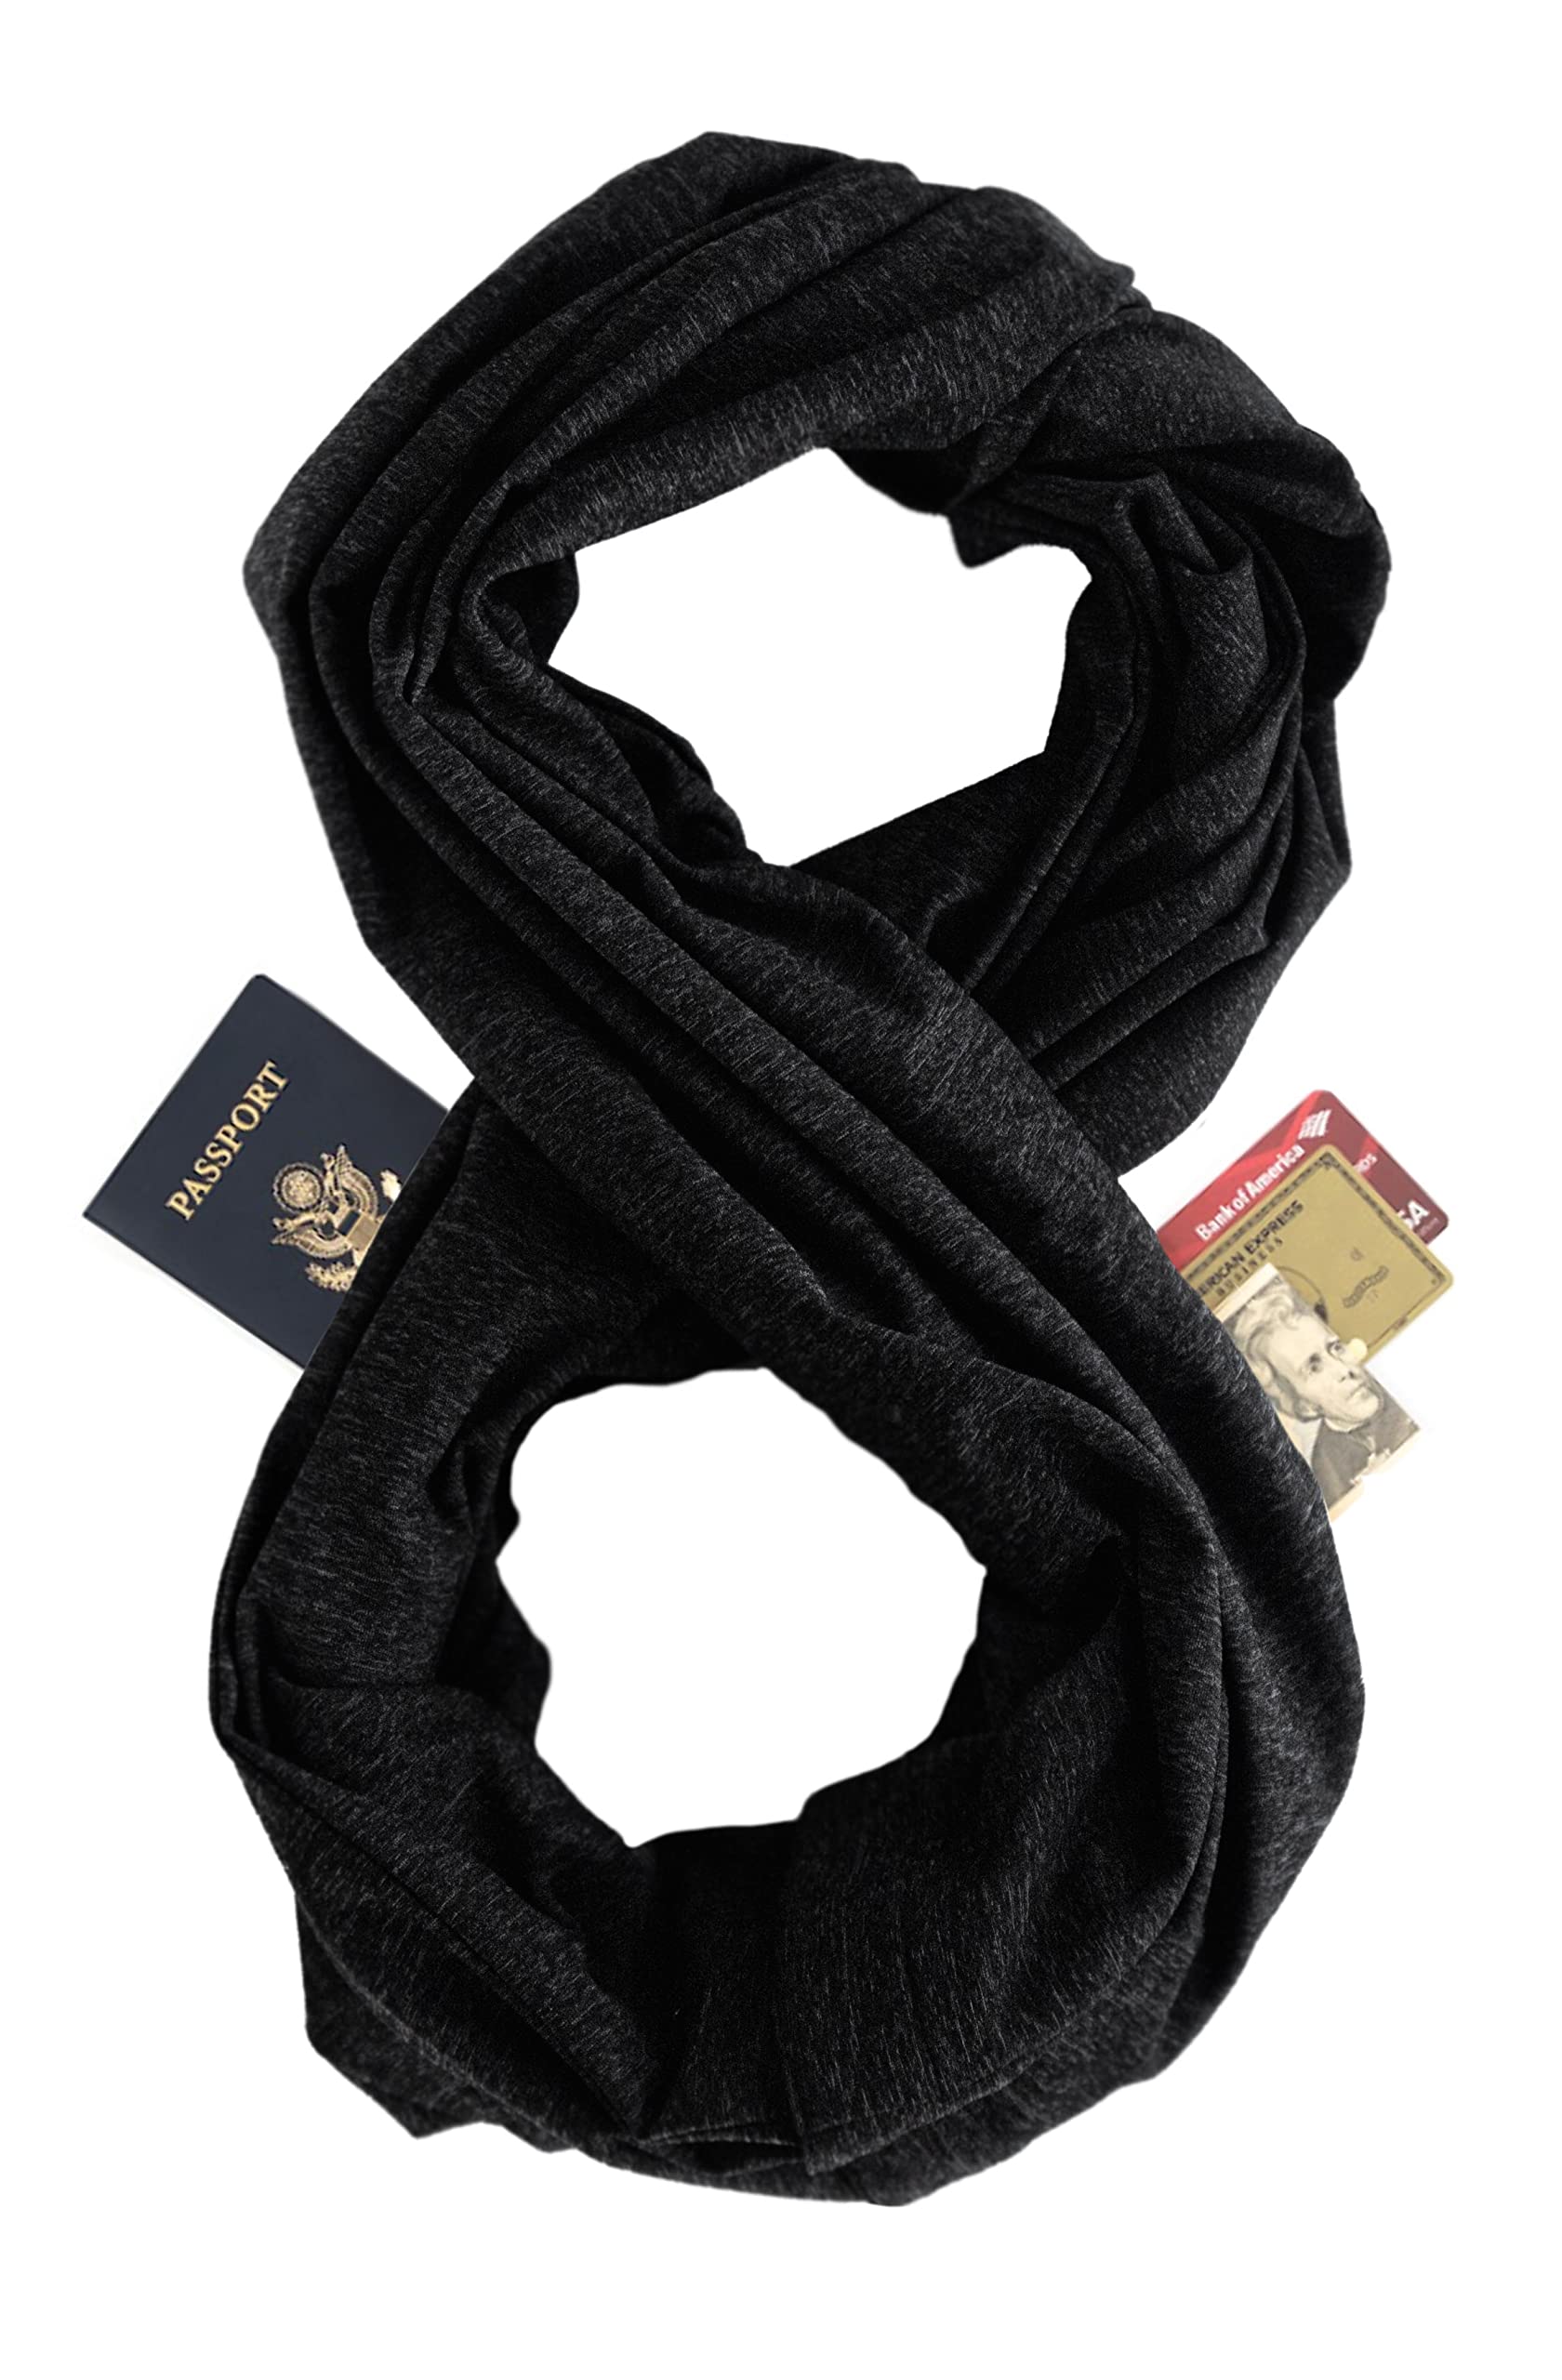 Book Cover Zero Grid Infinity Scarf with Hidden Pockets Converts to Blanket and Wrap Perfect for Travel Midnight